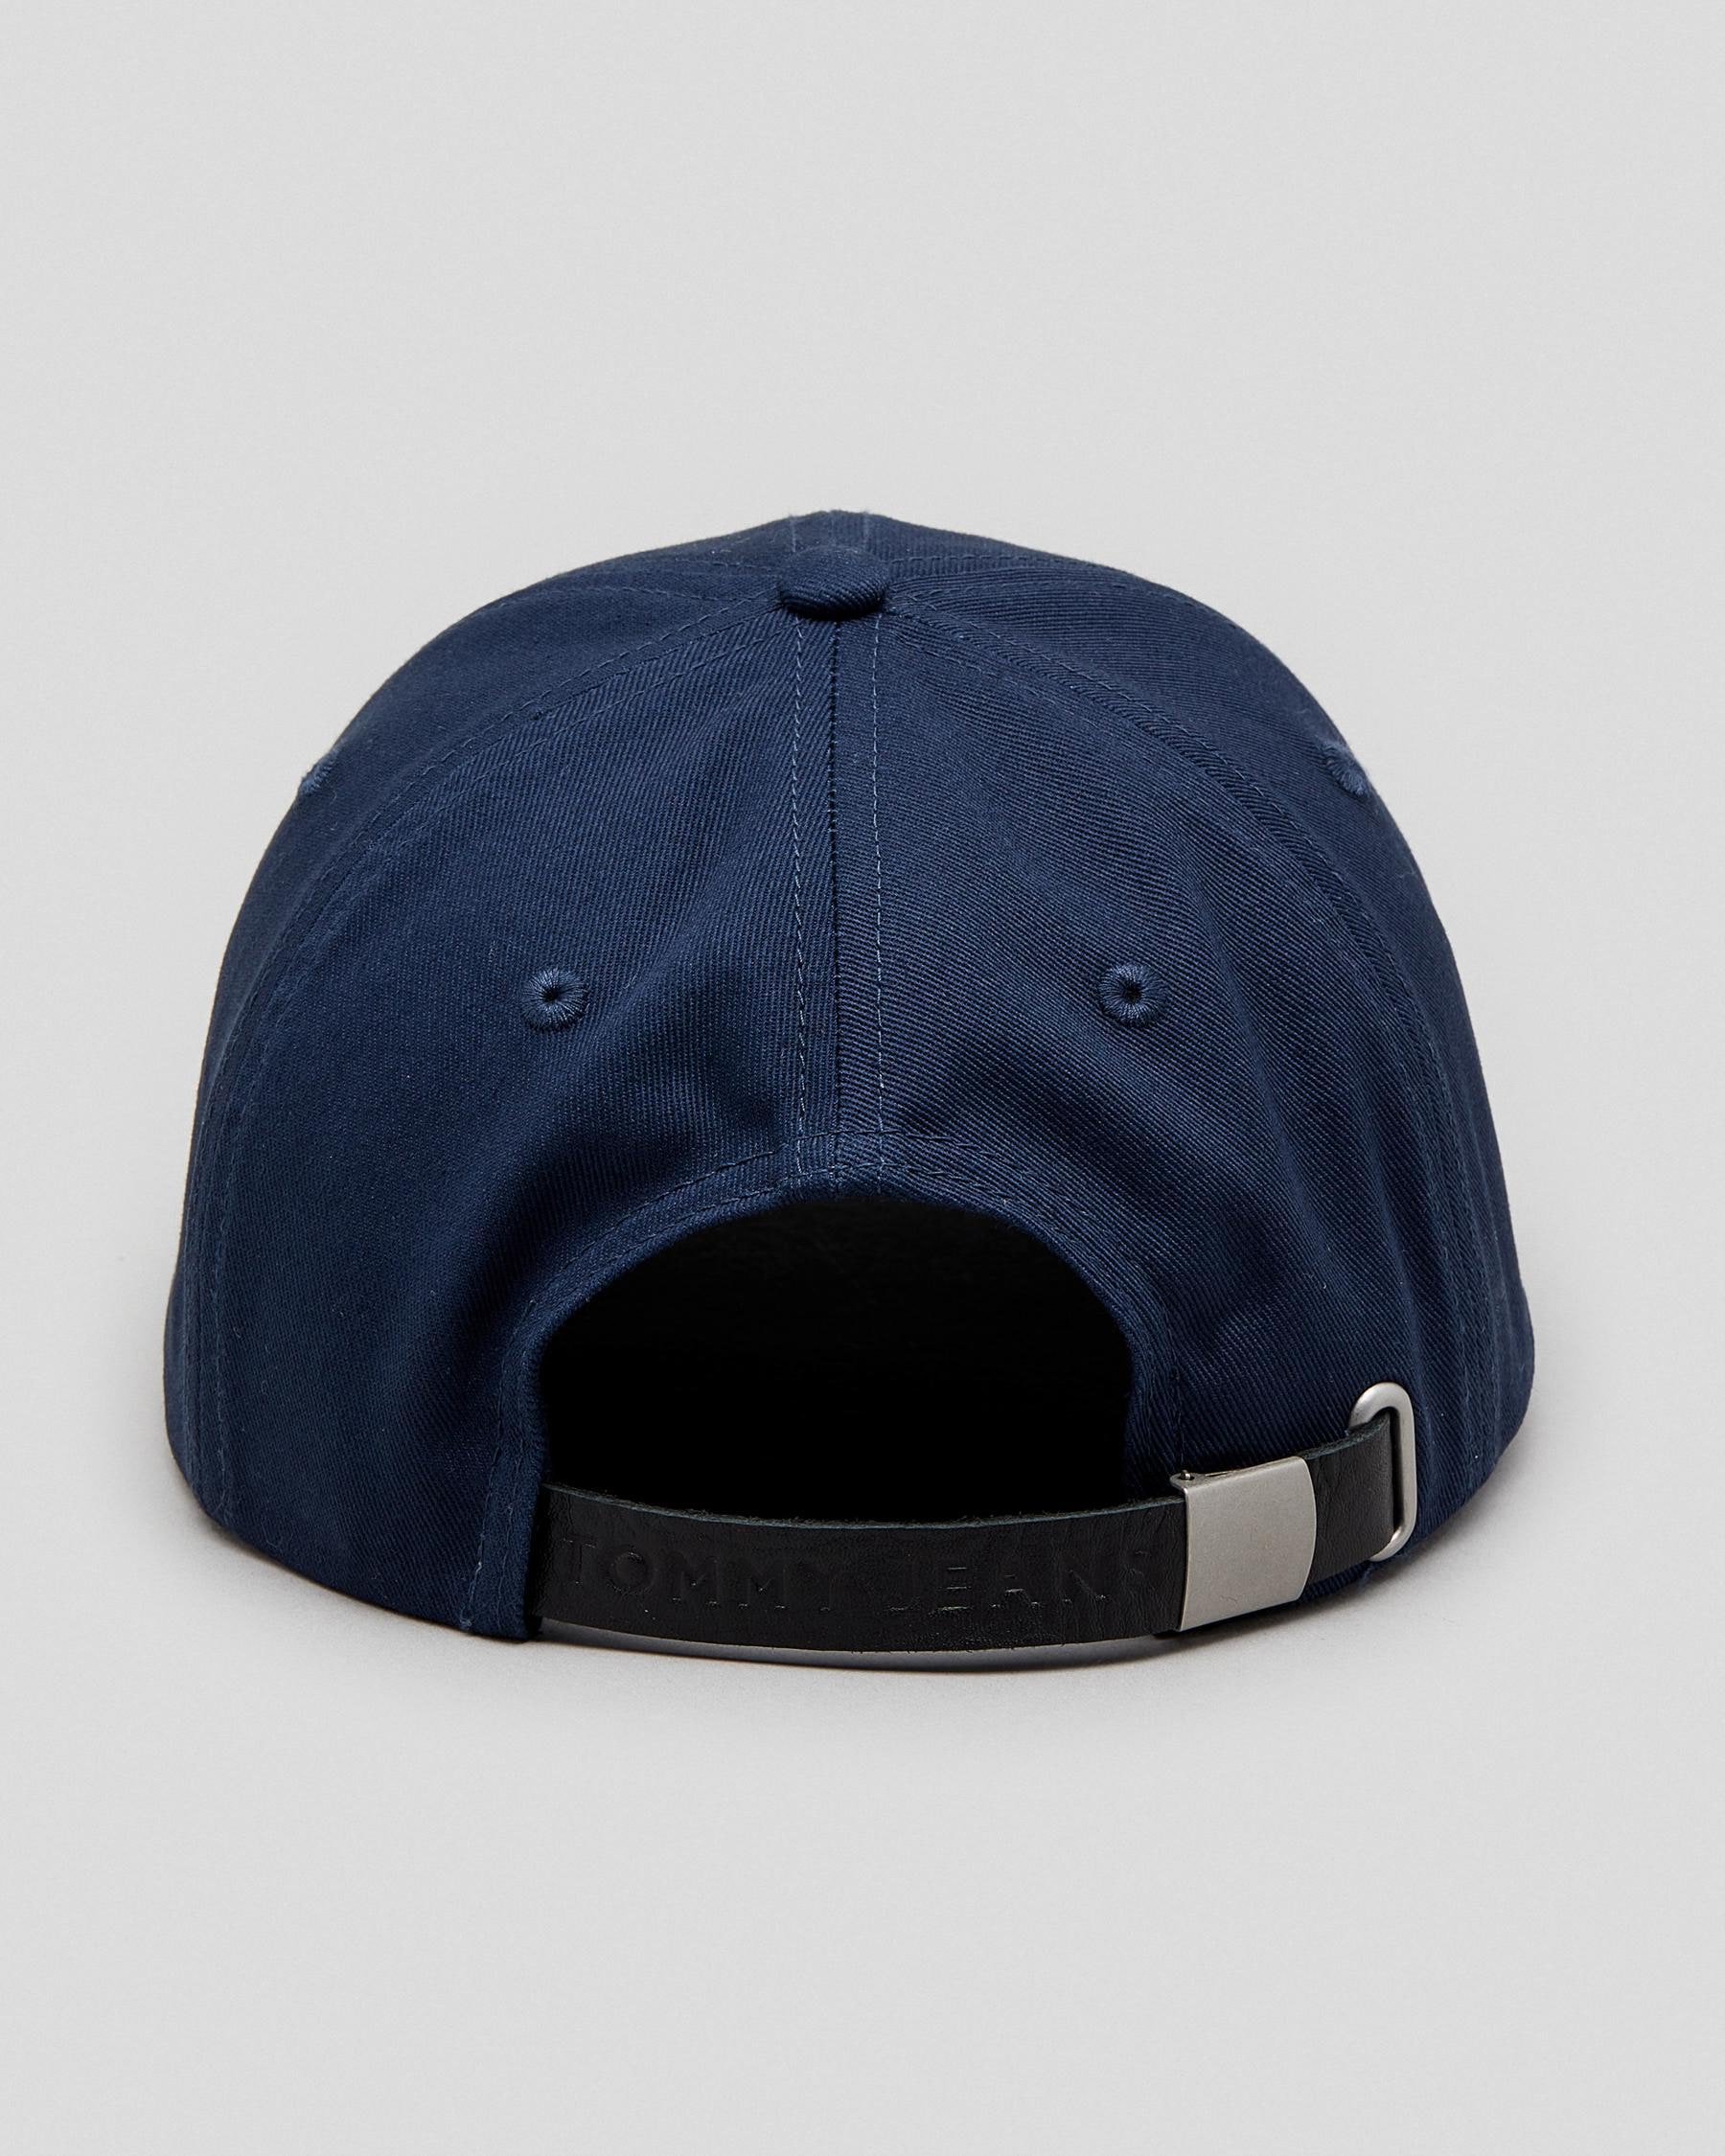 Tommy Hilfiger TJM Heritage Cap Easy Shipping In Navy Twilight - United Beach - States & FREE* Returns City